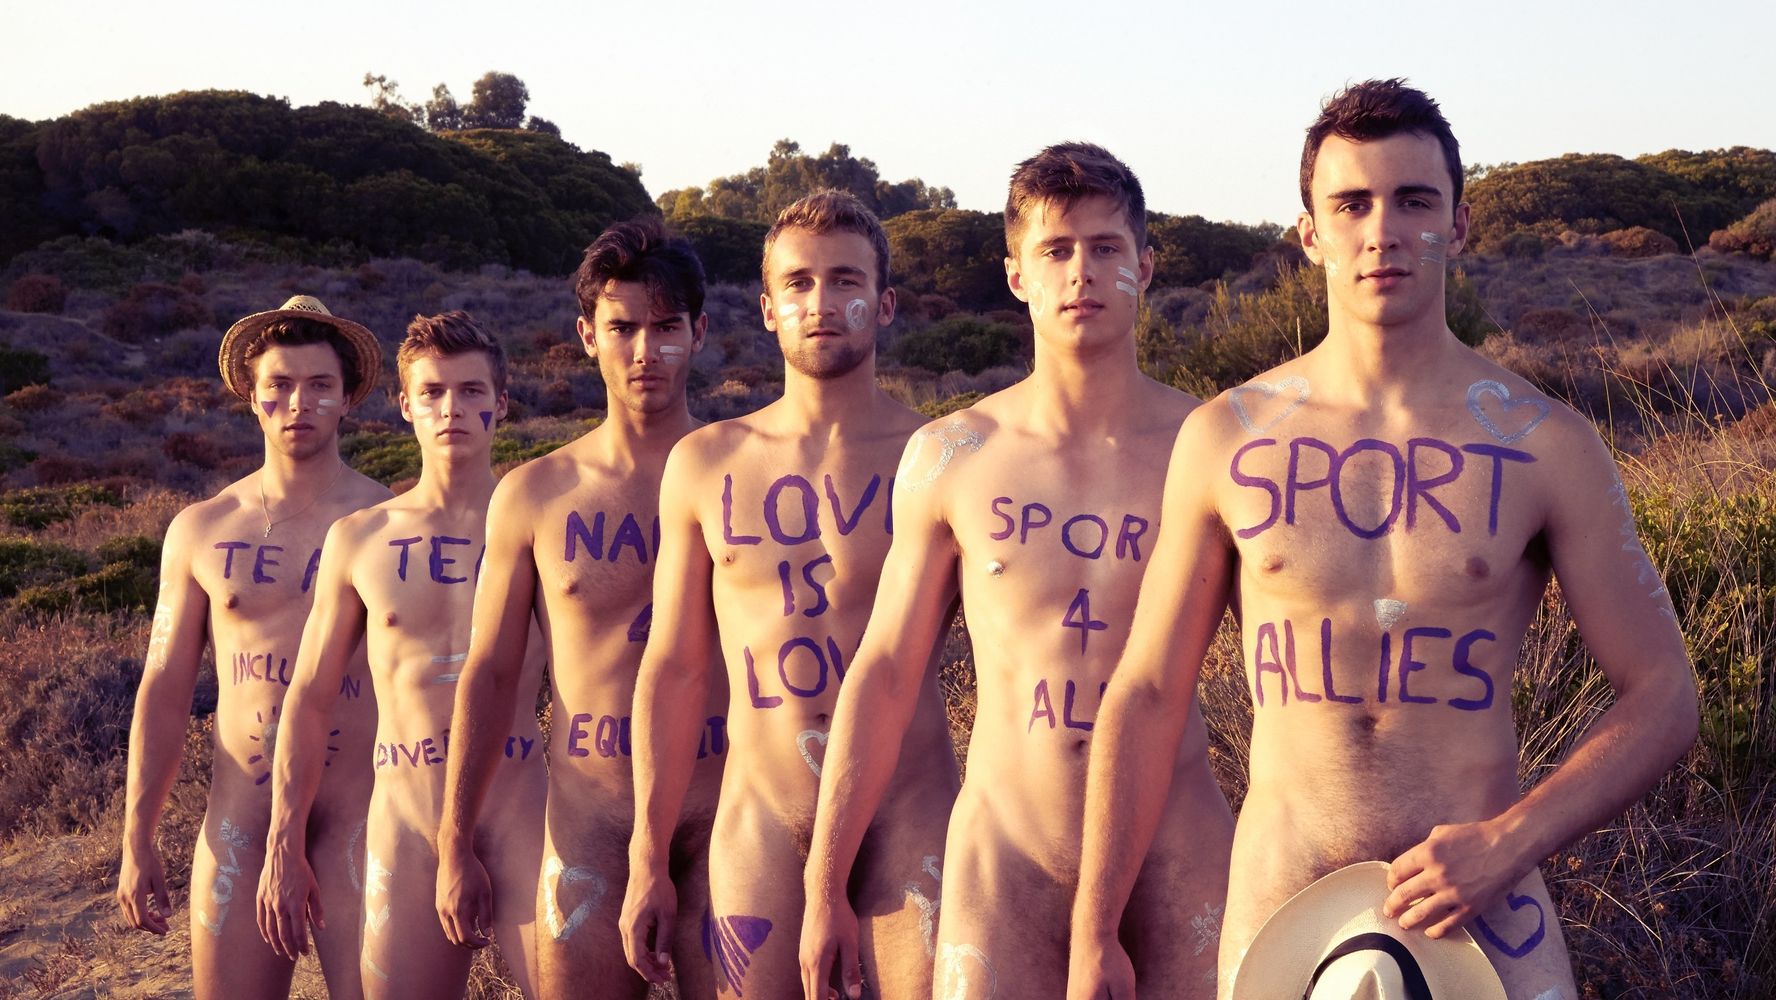 gay men,Warwick Rowers Calendar,Queer Voices,Arts & Culture,The Wor...